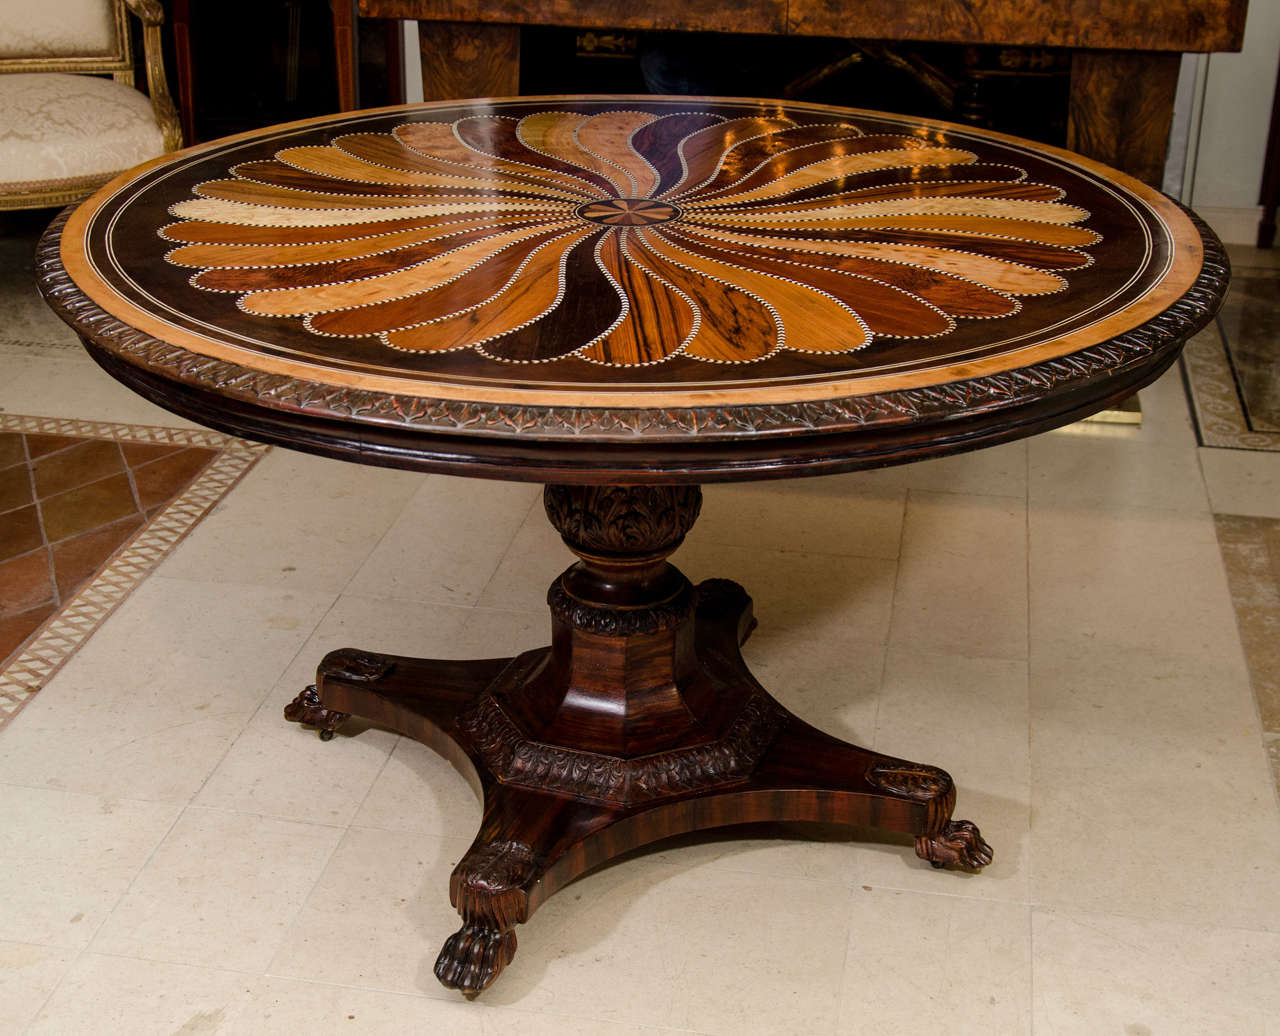 A rare Anglo-Indian Ceylonese specimen wood inlaid center table with spiraling petal motif and a leaftip carved edge, the pedestal with paw foot base.